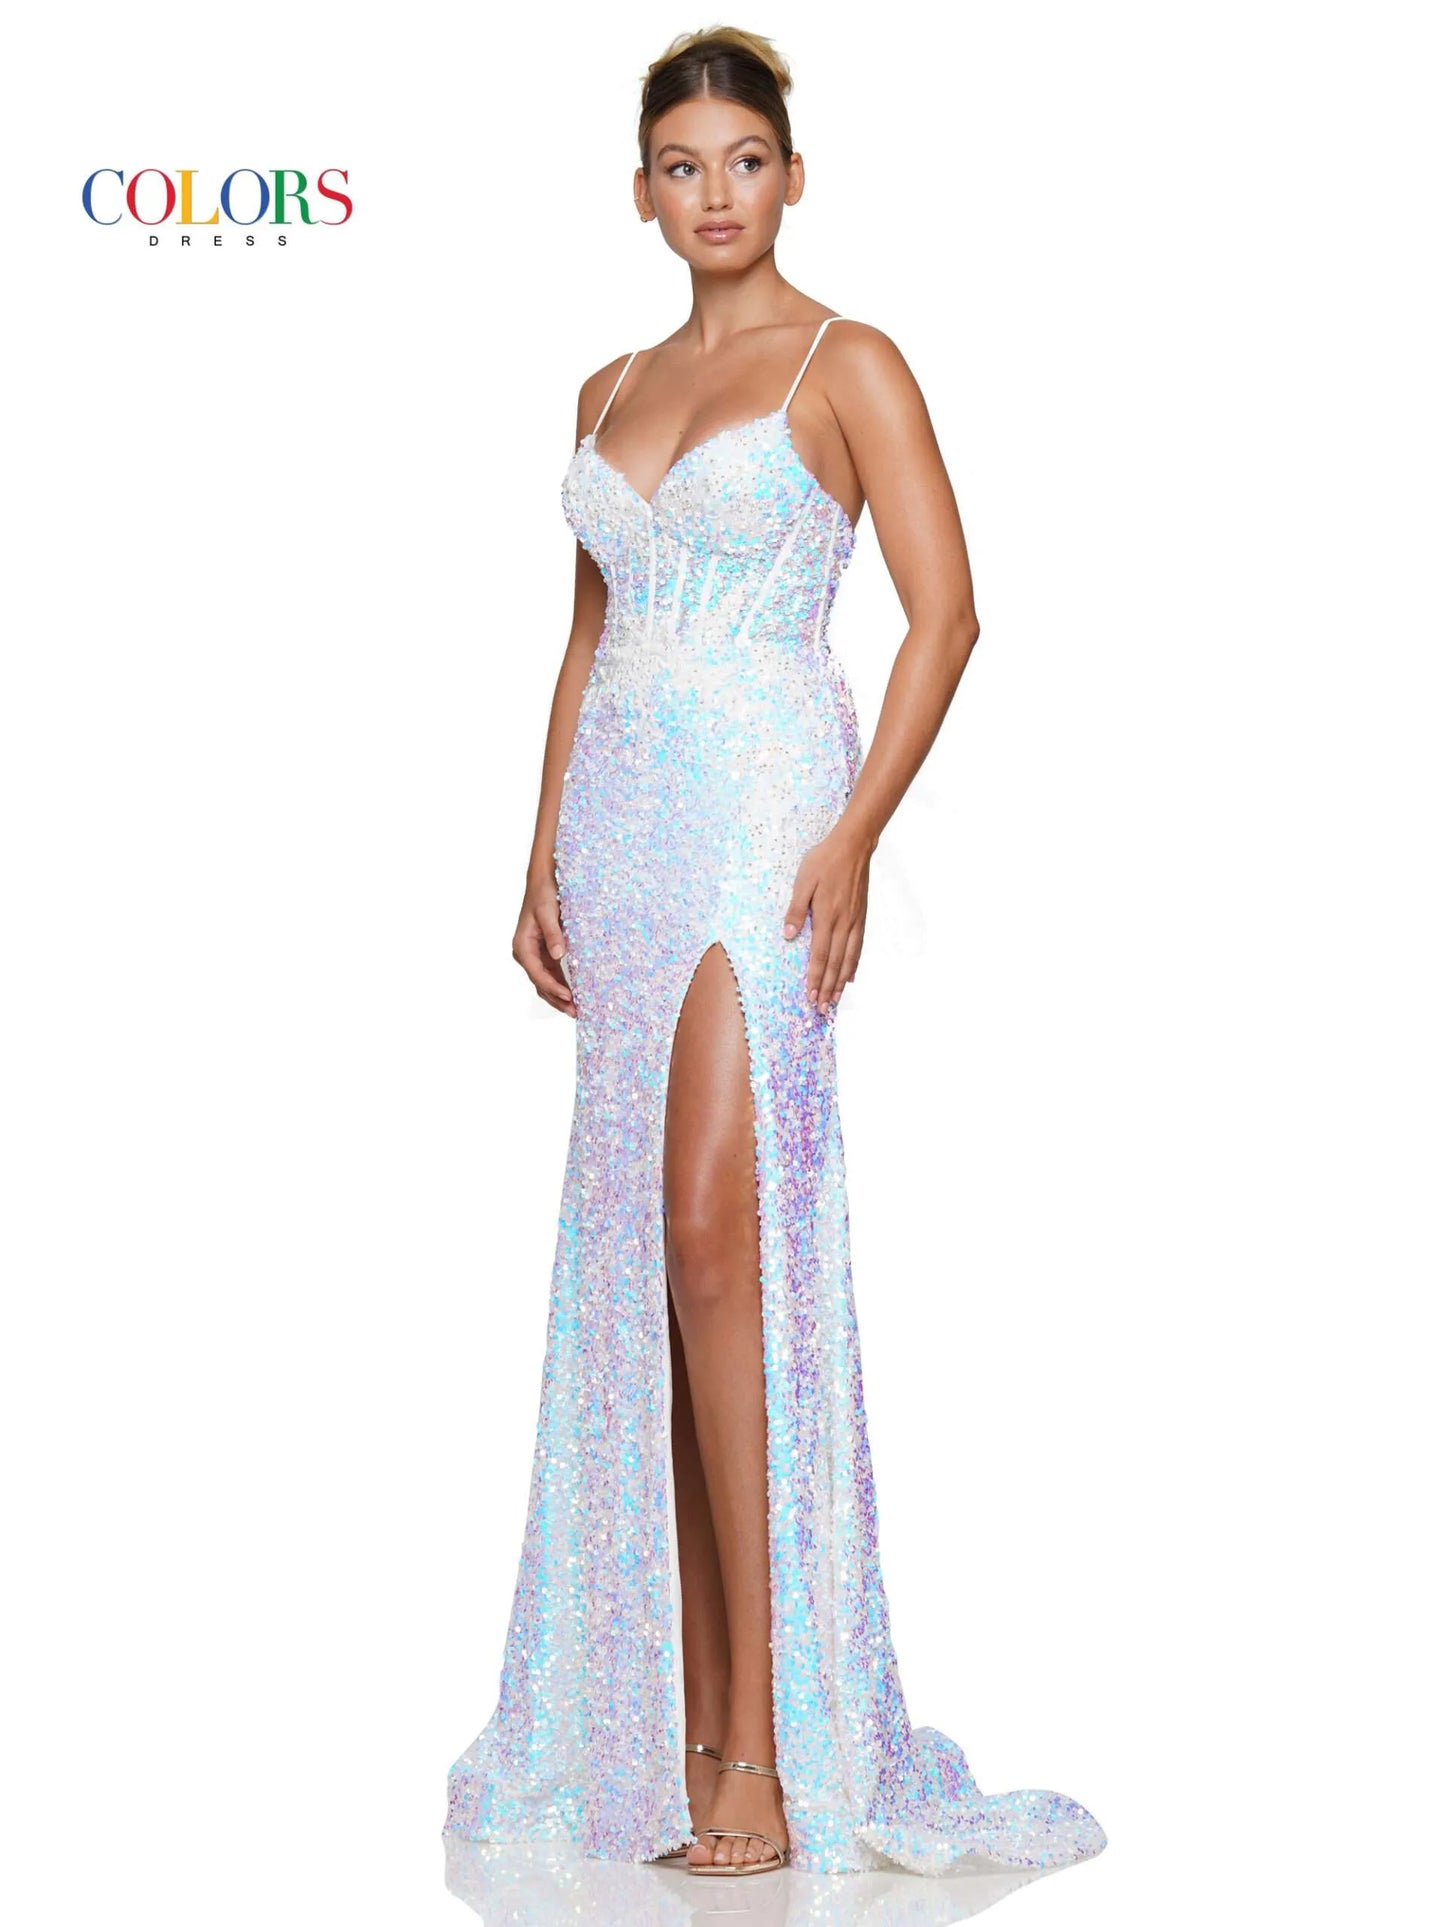 Colors Dress 3299 Long Fitted Sequin Lace Prom Dress Backless Corset slit skirt Pageant Gown